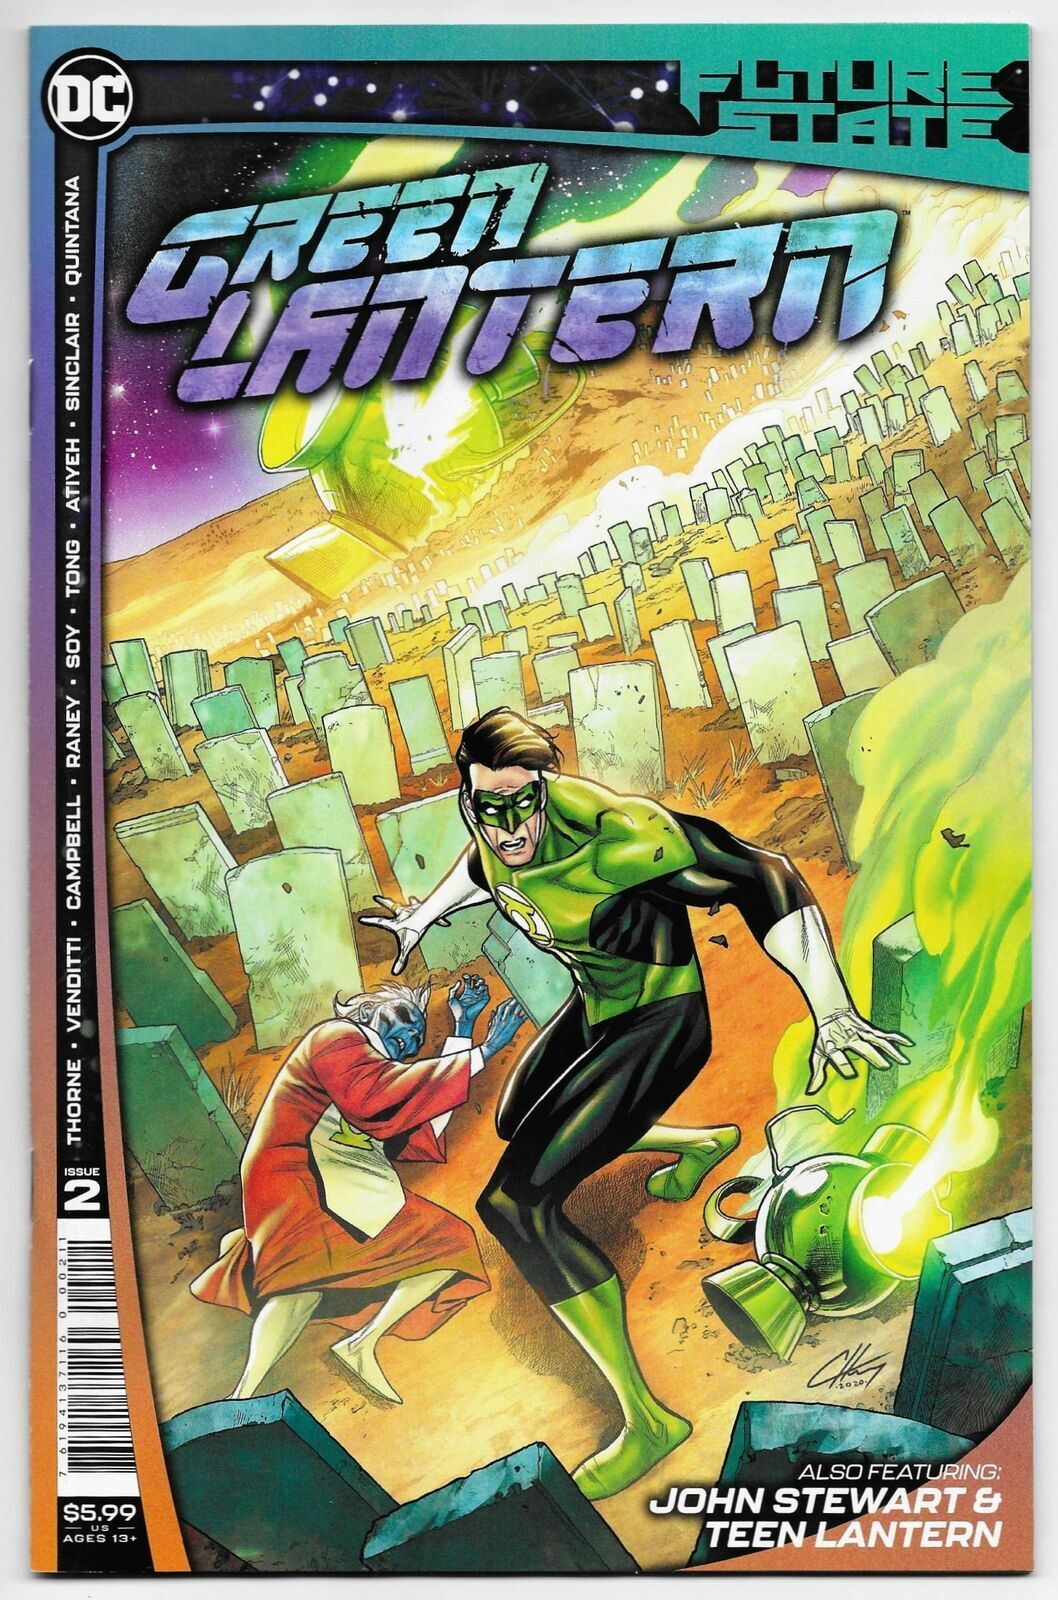 DC Comic Book Super Hero Green Lantern and First Day Cover of the Green Lantern stamp